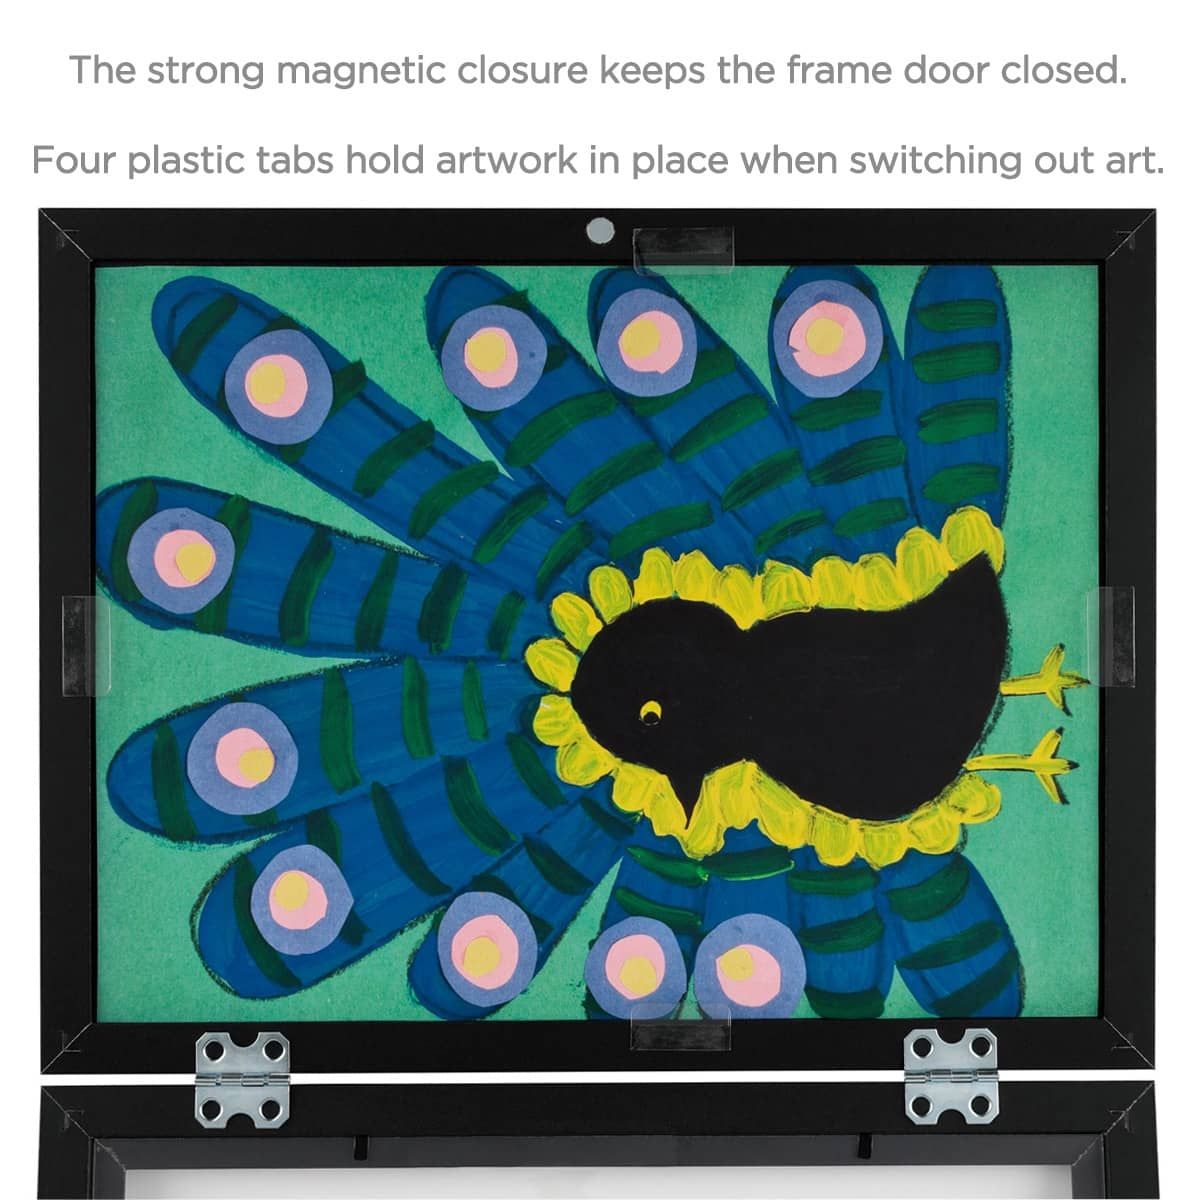 Magnetic closure keeps the frame door closed